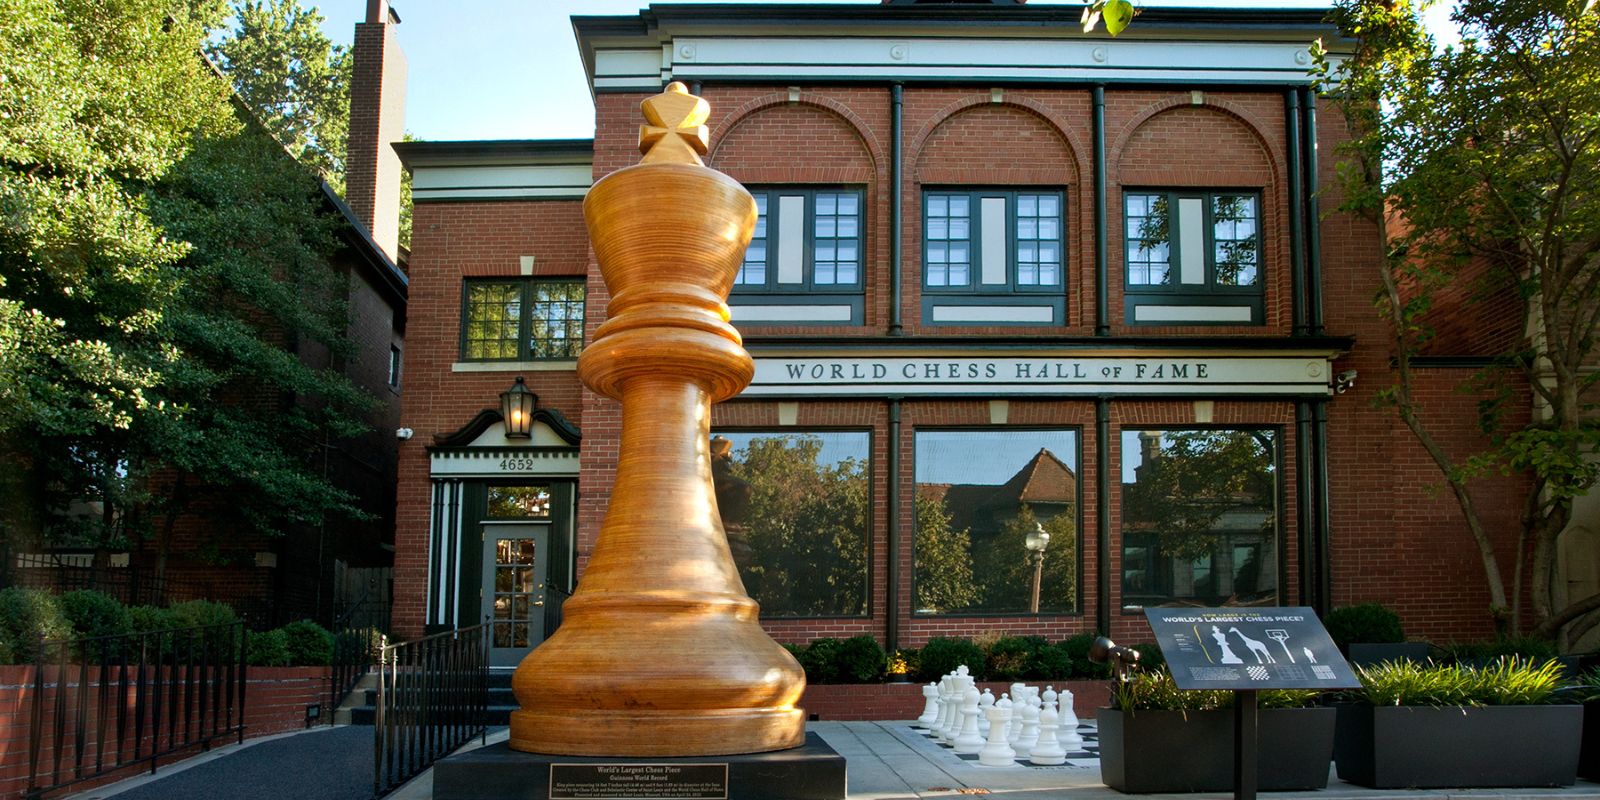 In the Central West End, the world’s largest chess piece stands in front of the World Chess Hall of Fame.